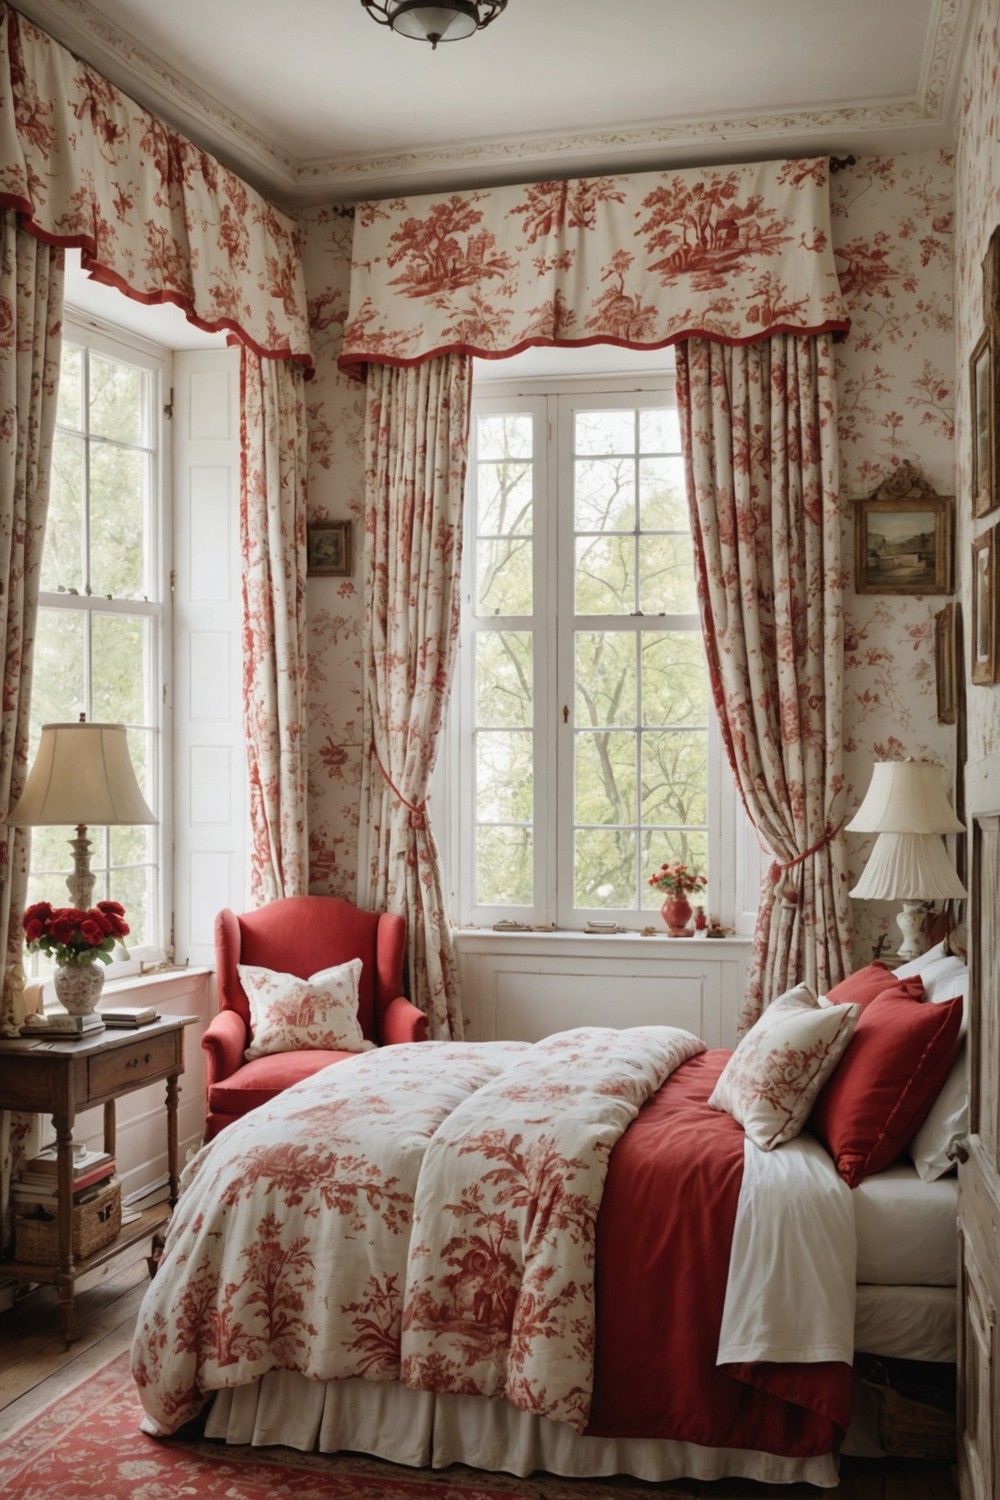 Classic Toile Fabric in Curtains and Bedding